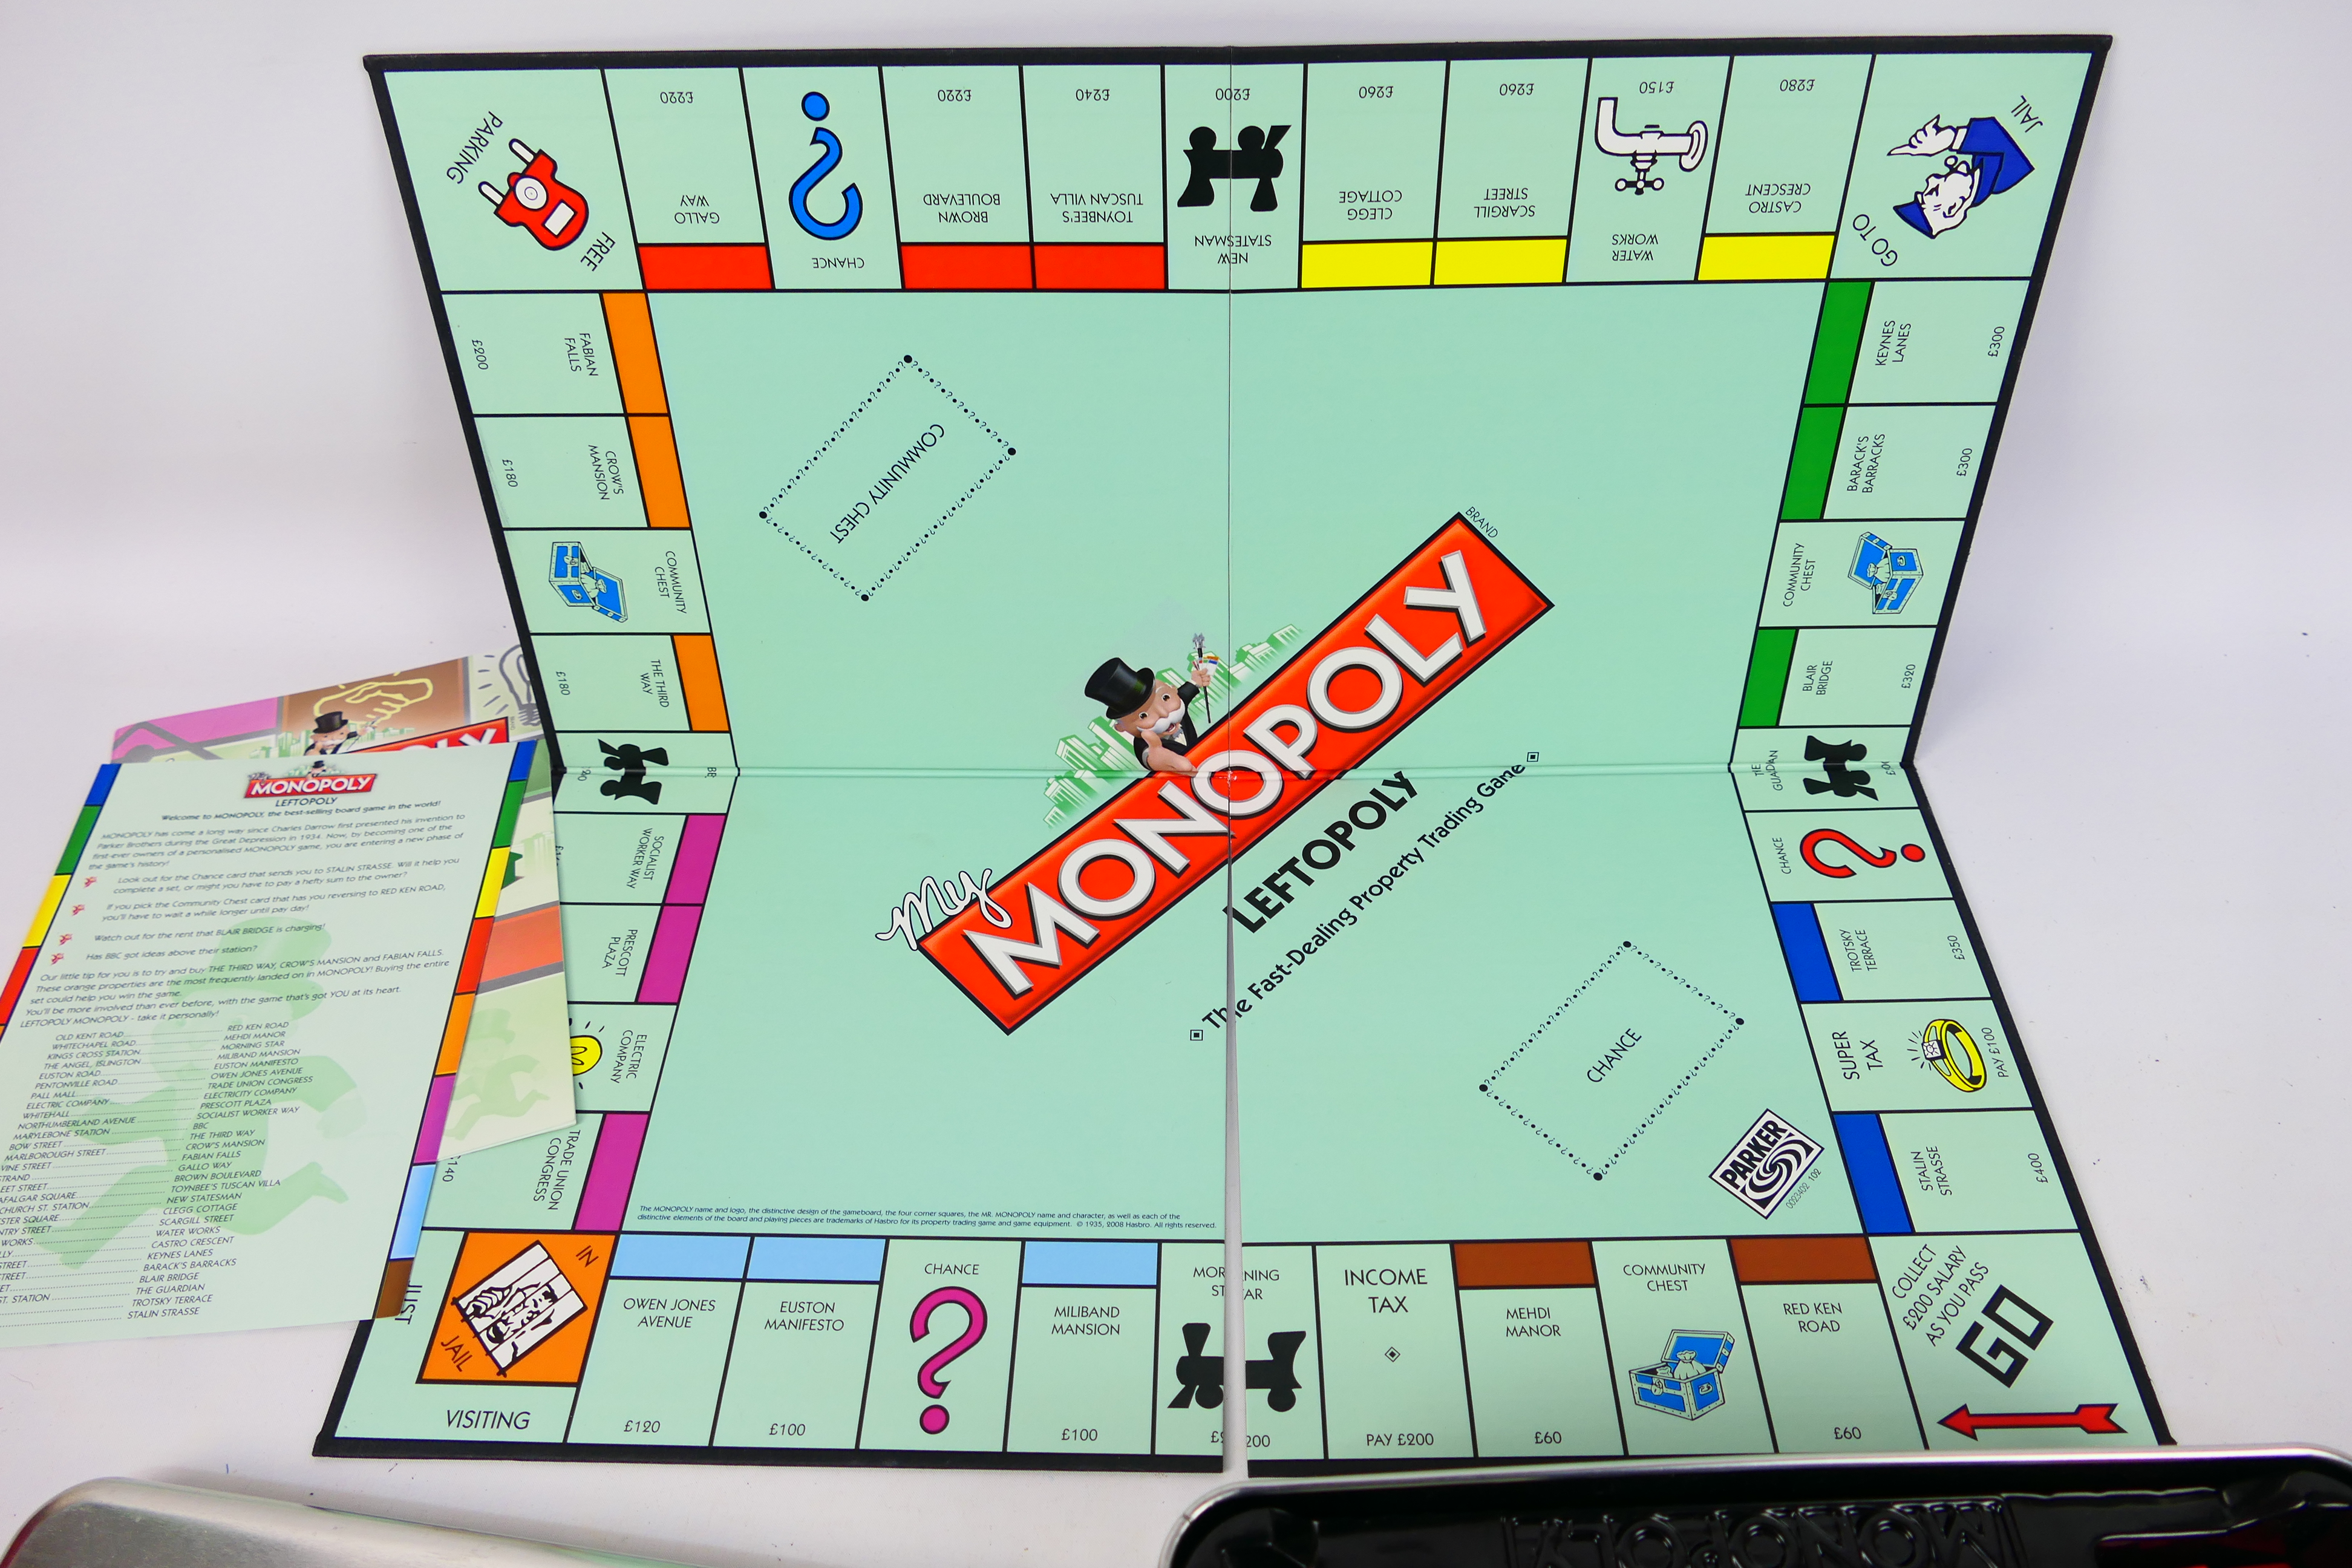 Monopoly - A rare personalised Monopoly game specially made by Hasbro for a British political - Image 2 of 4